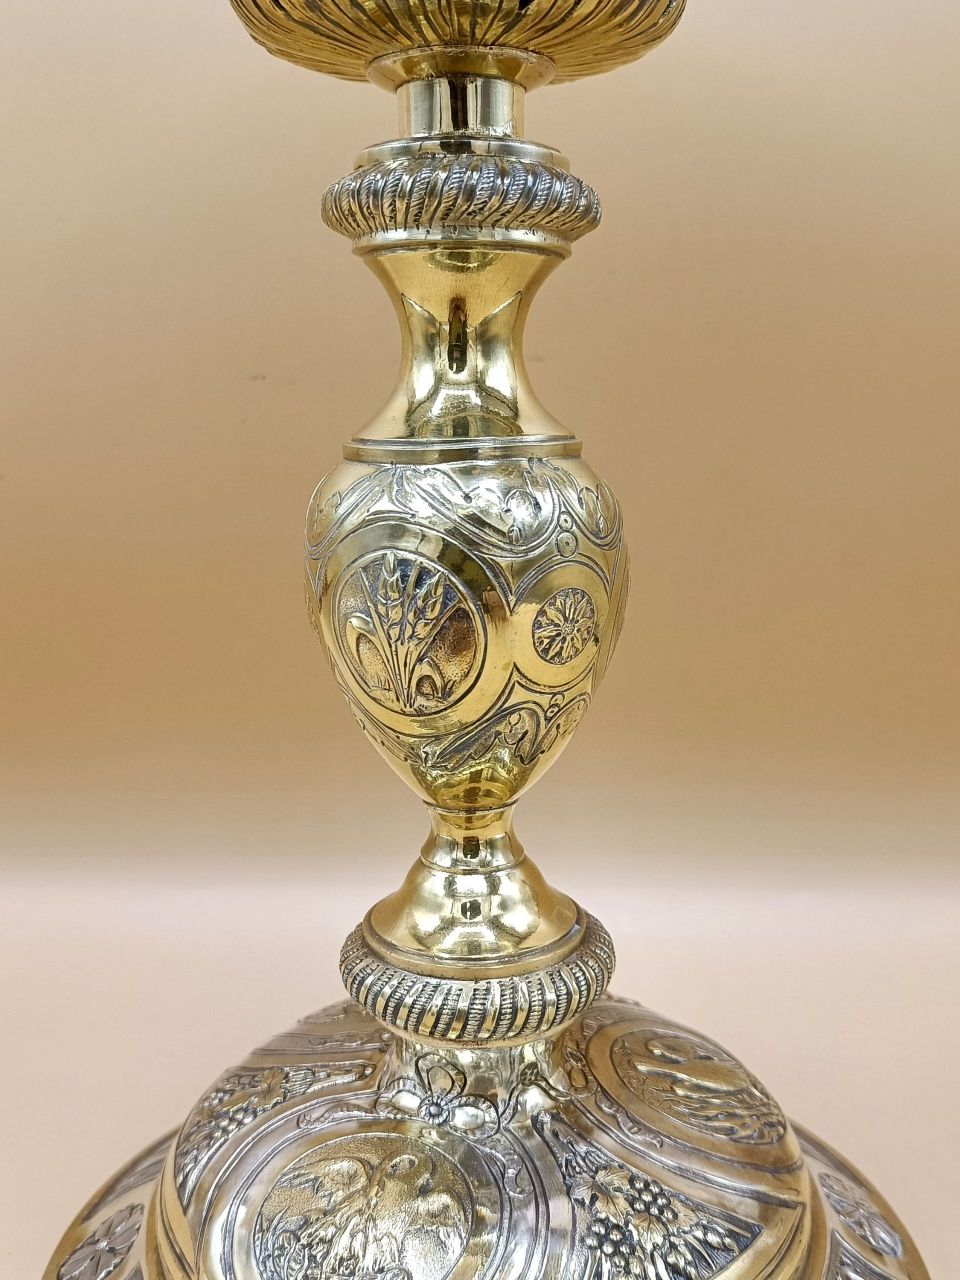 Baroc chalice sterling silver end XVIIIth c.